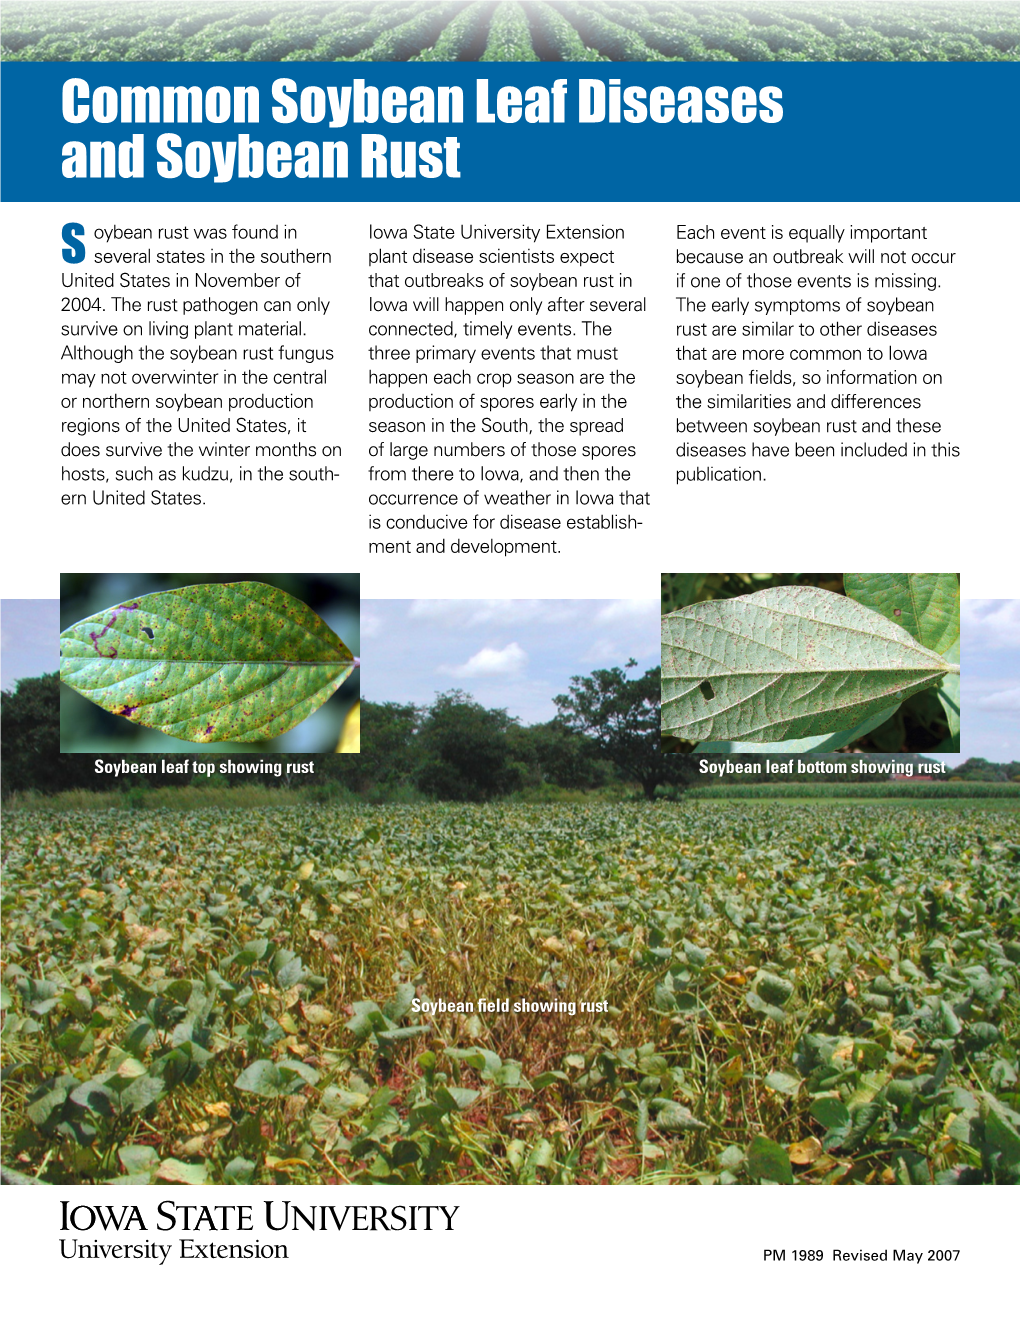 Common Soybean Leaf Diseases and Soybean Rust